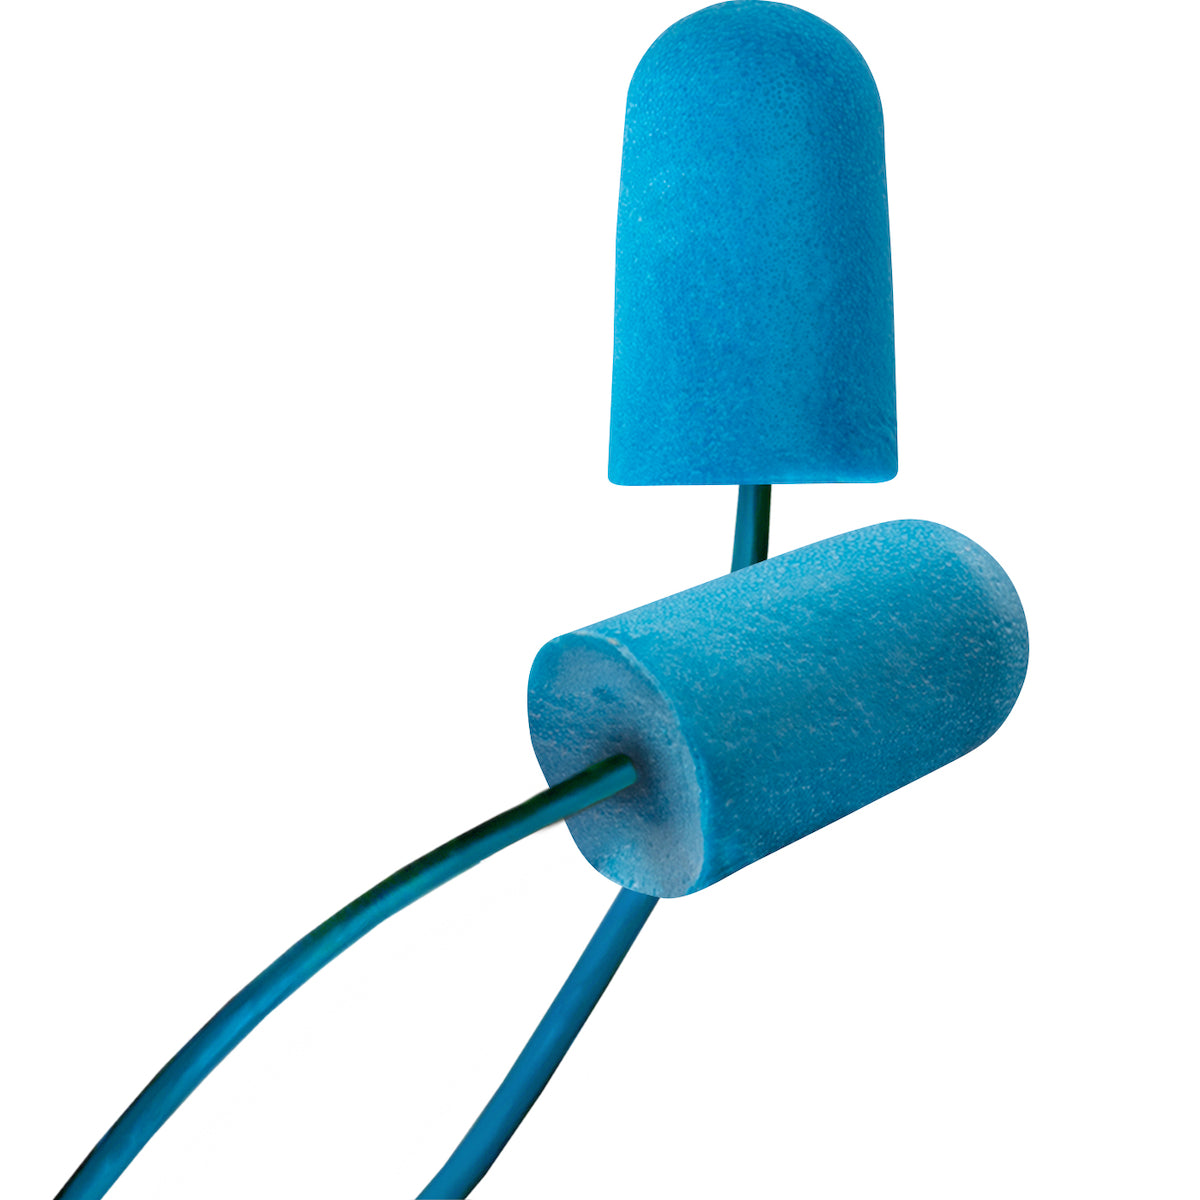 The blue color, metal detectable Food Pro Bullet™ BioSoft™ BSF-D disposable ear plug foam material provides the same fit and performance as conventional polyurethane or PVC materials, but with a lower carbon footprint. This innovative technology not only reduces emissions during manufacturing, but it contains bio-based materials making BioSoft™ more environmentally friendly at end of use